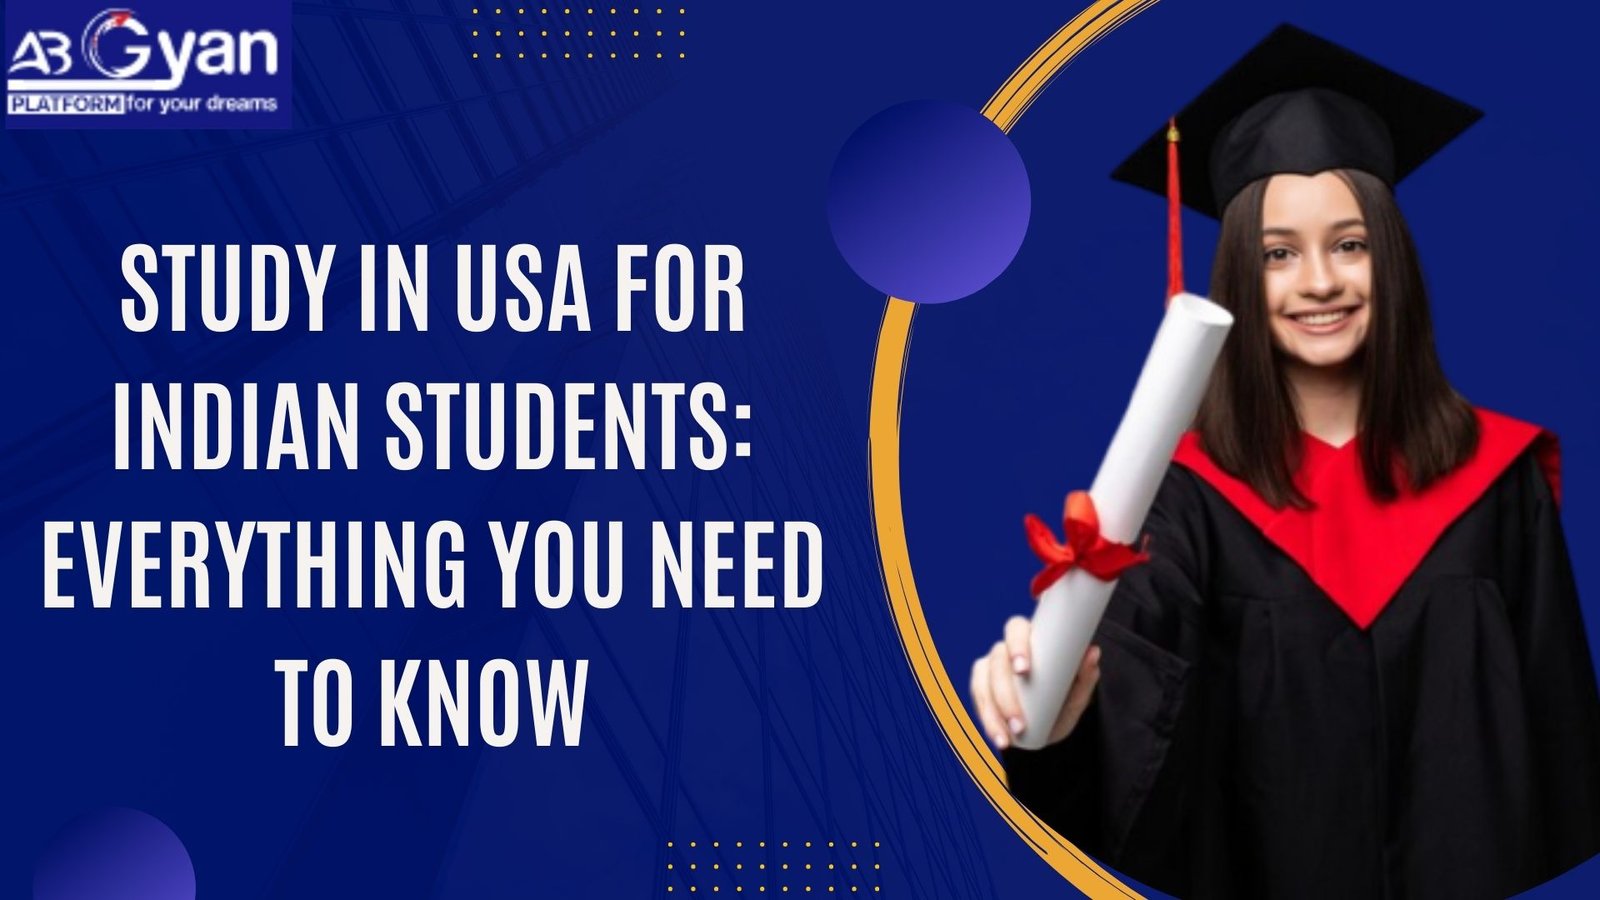 Study in USA for Indian Students: Everything You Need to Know - Fyberly